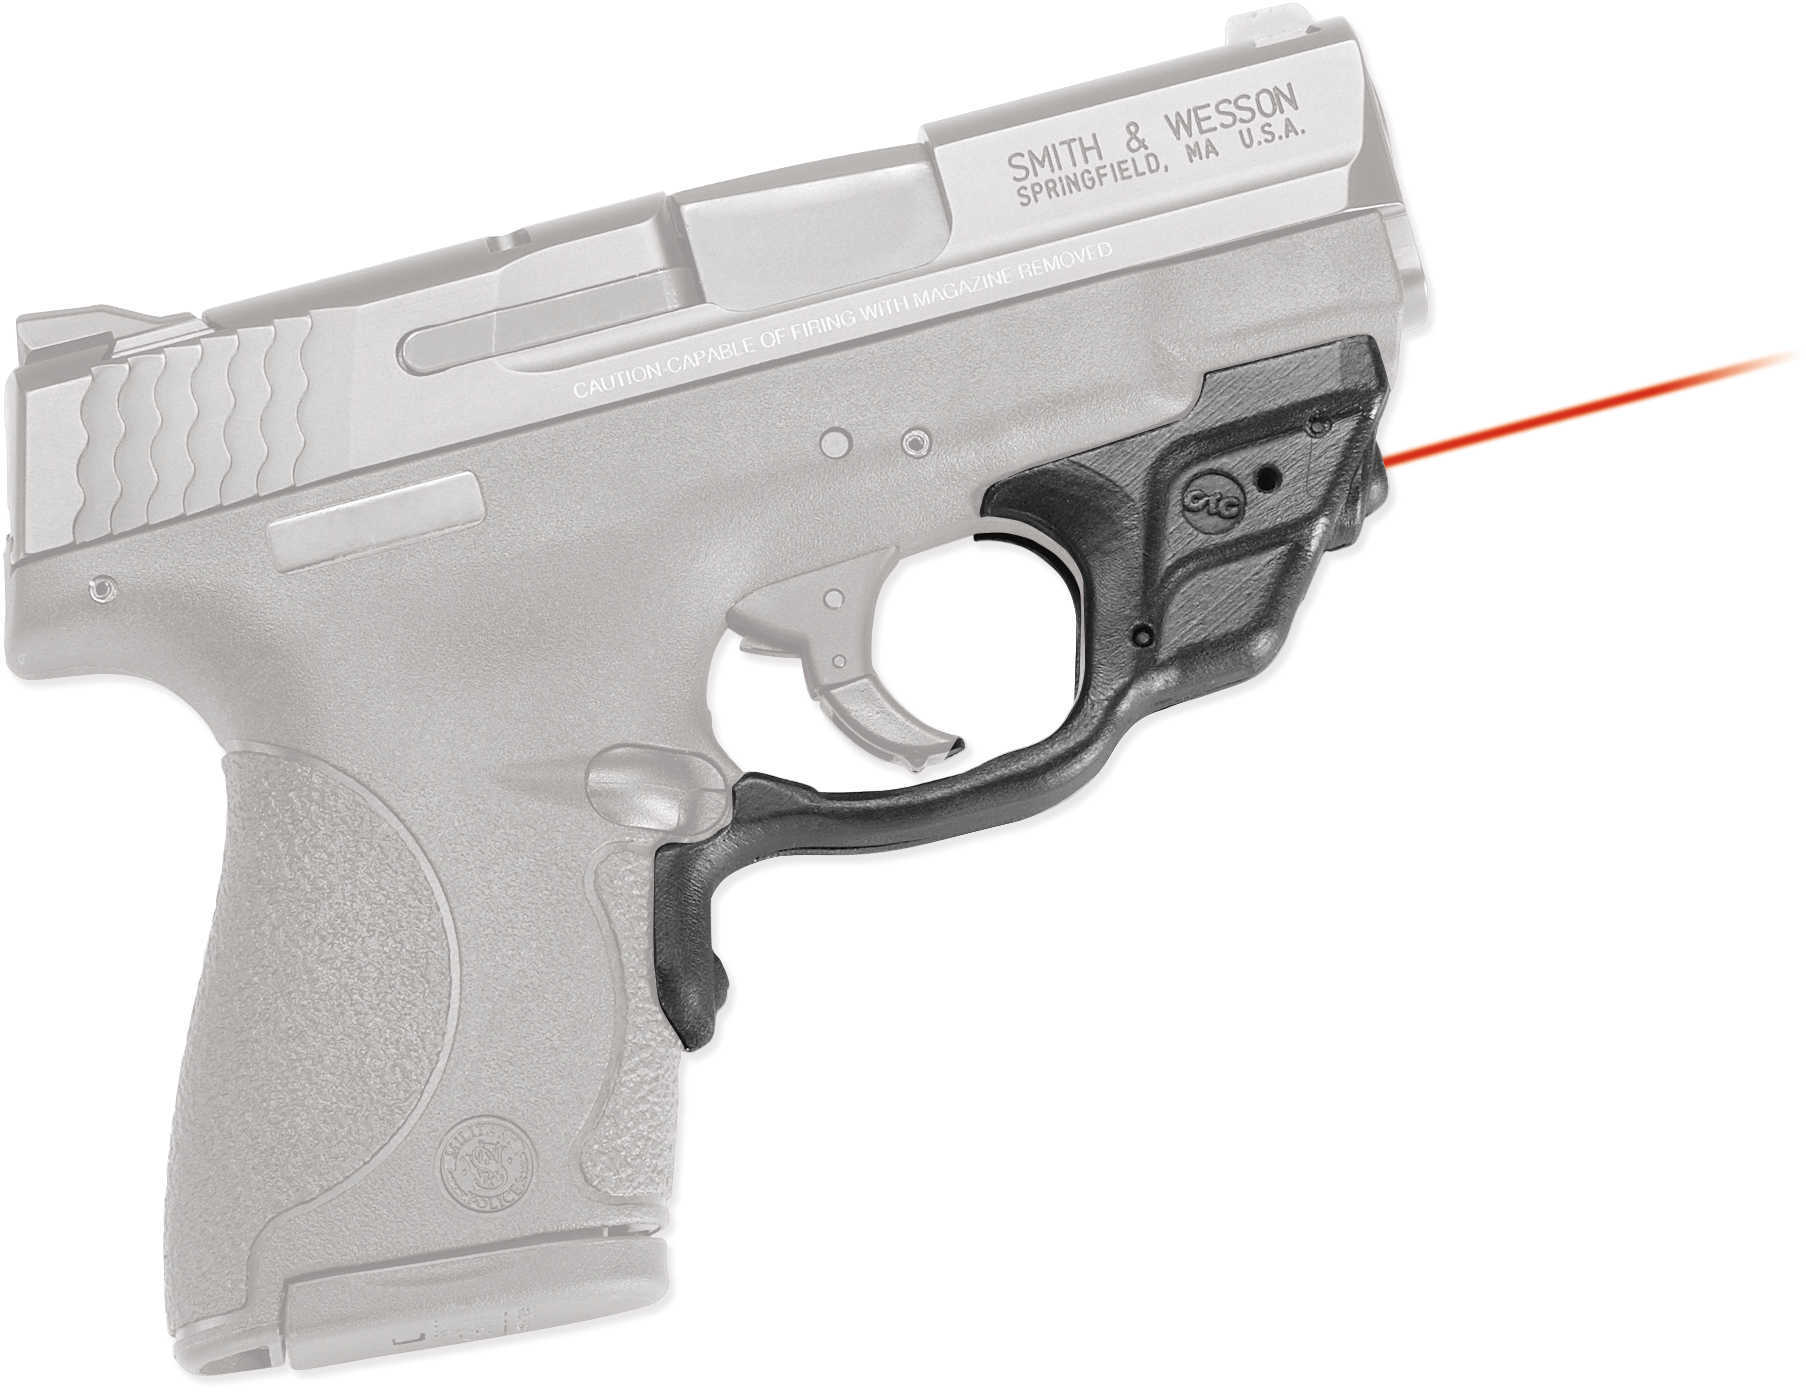 Crimson Trace S&w Shield 9mm 40 S&w Front Act Laserguard